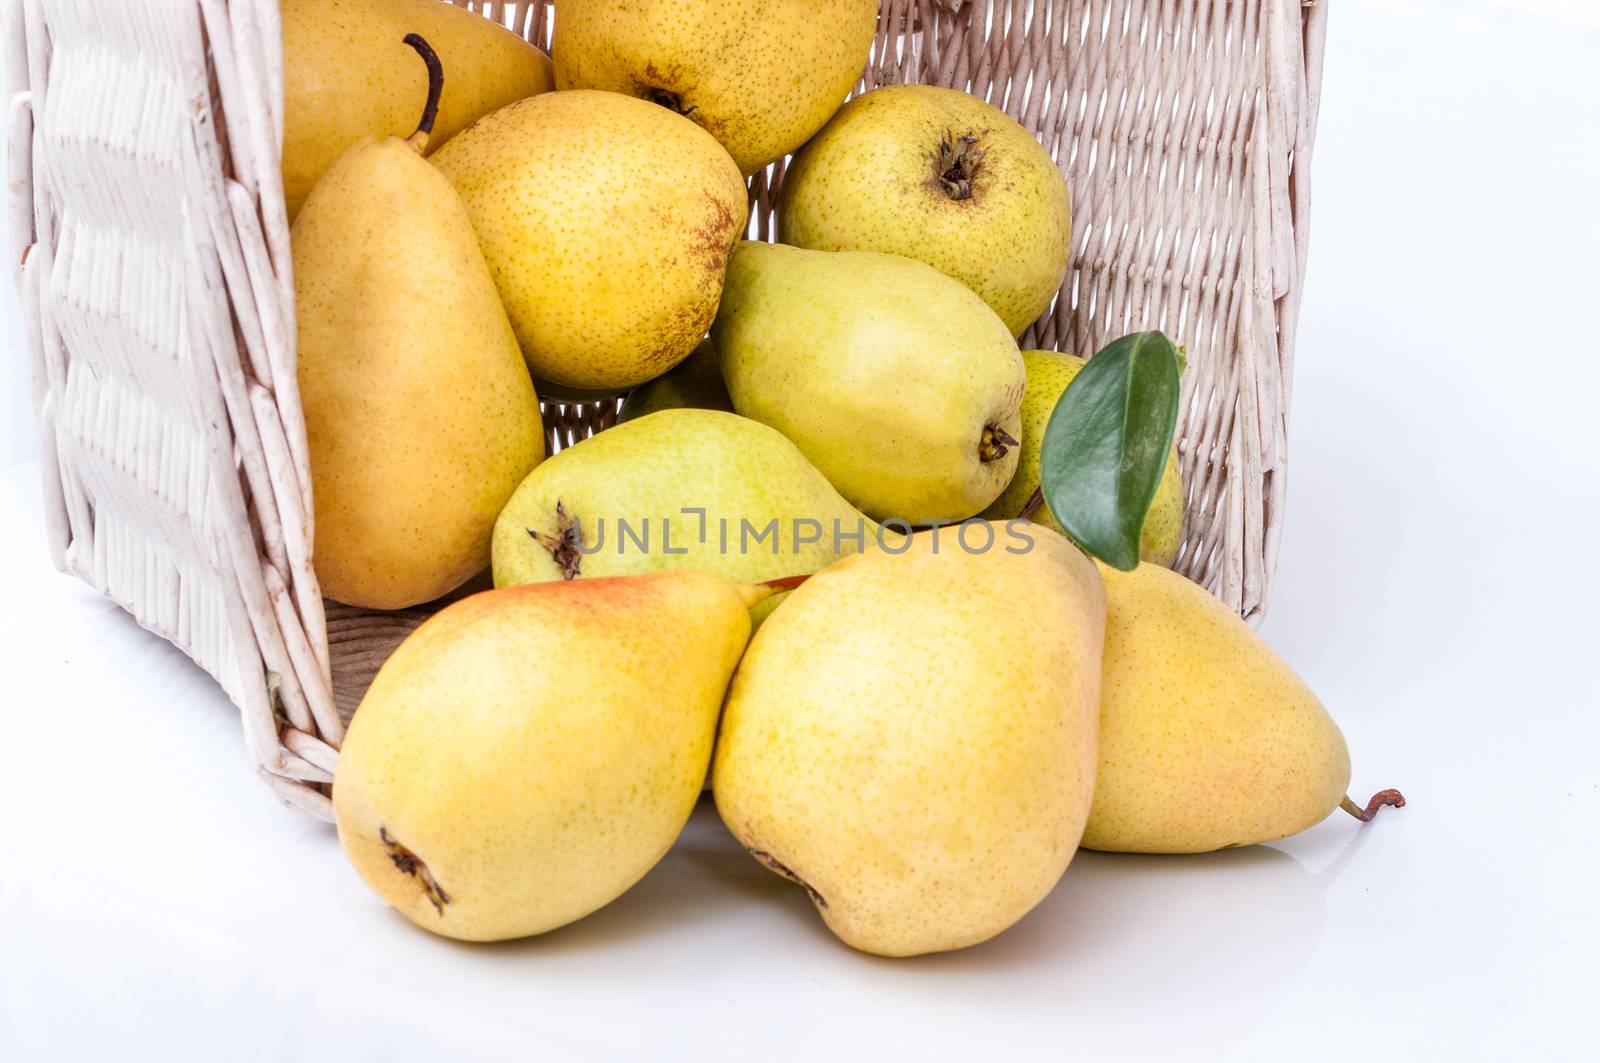 Yellow pears in a basket isolated on white background